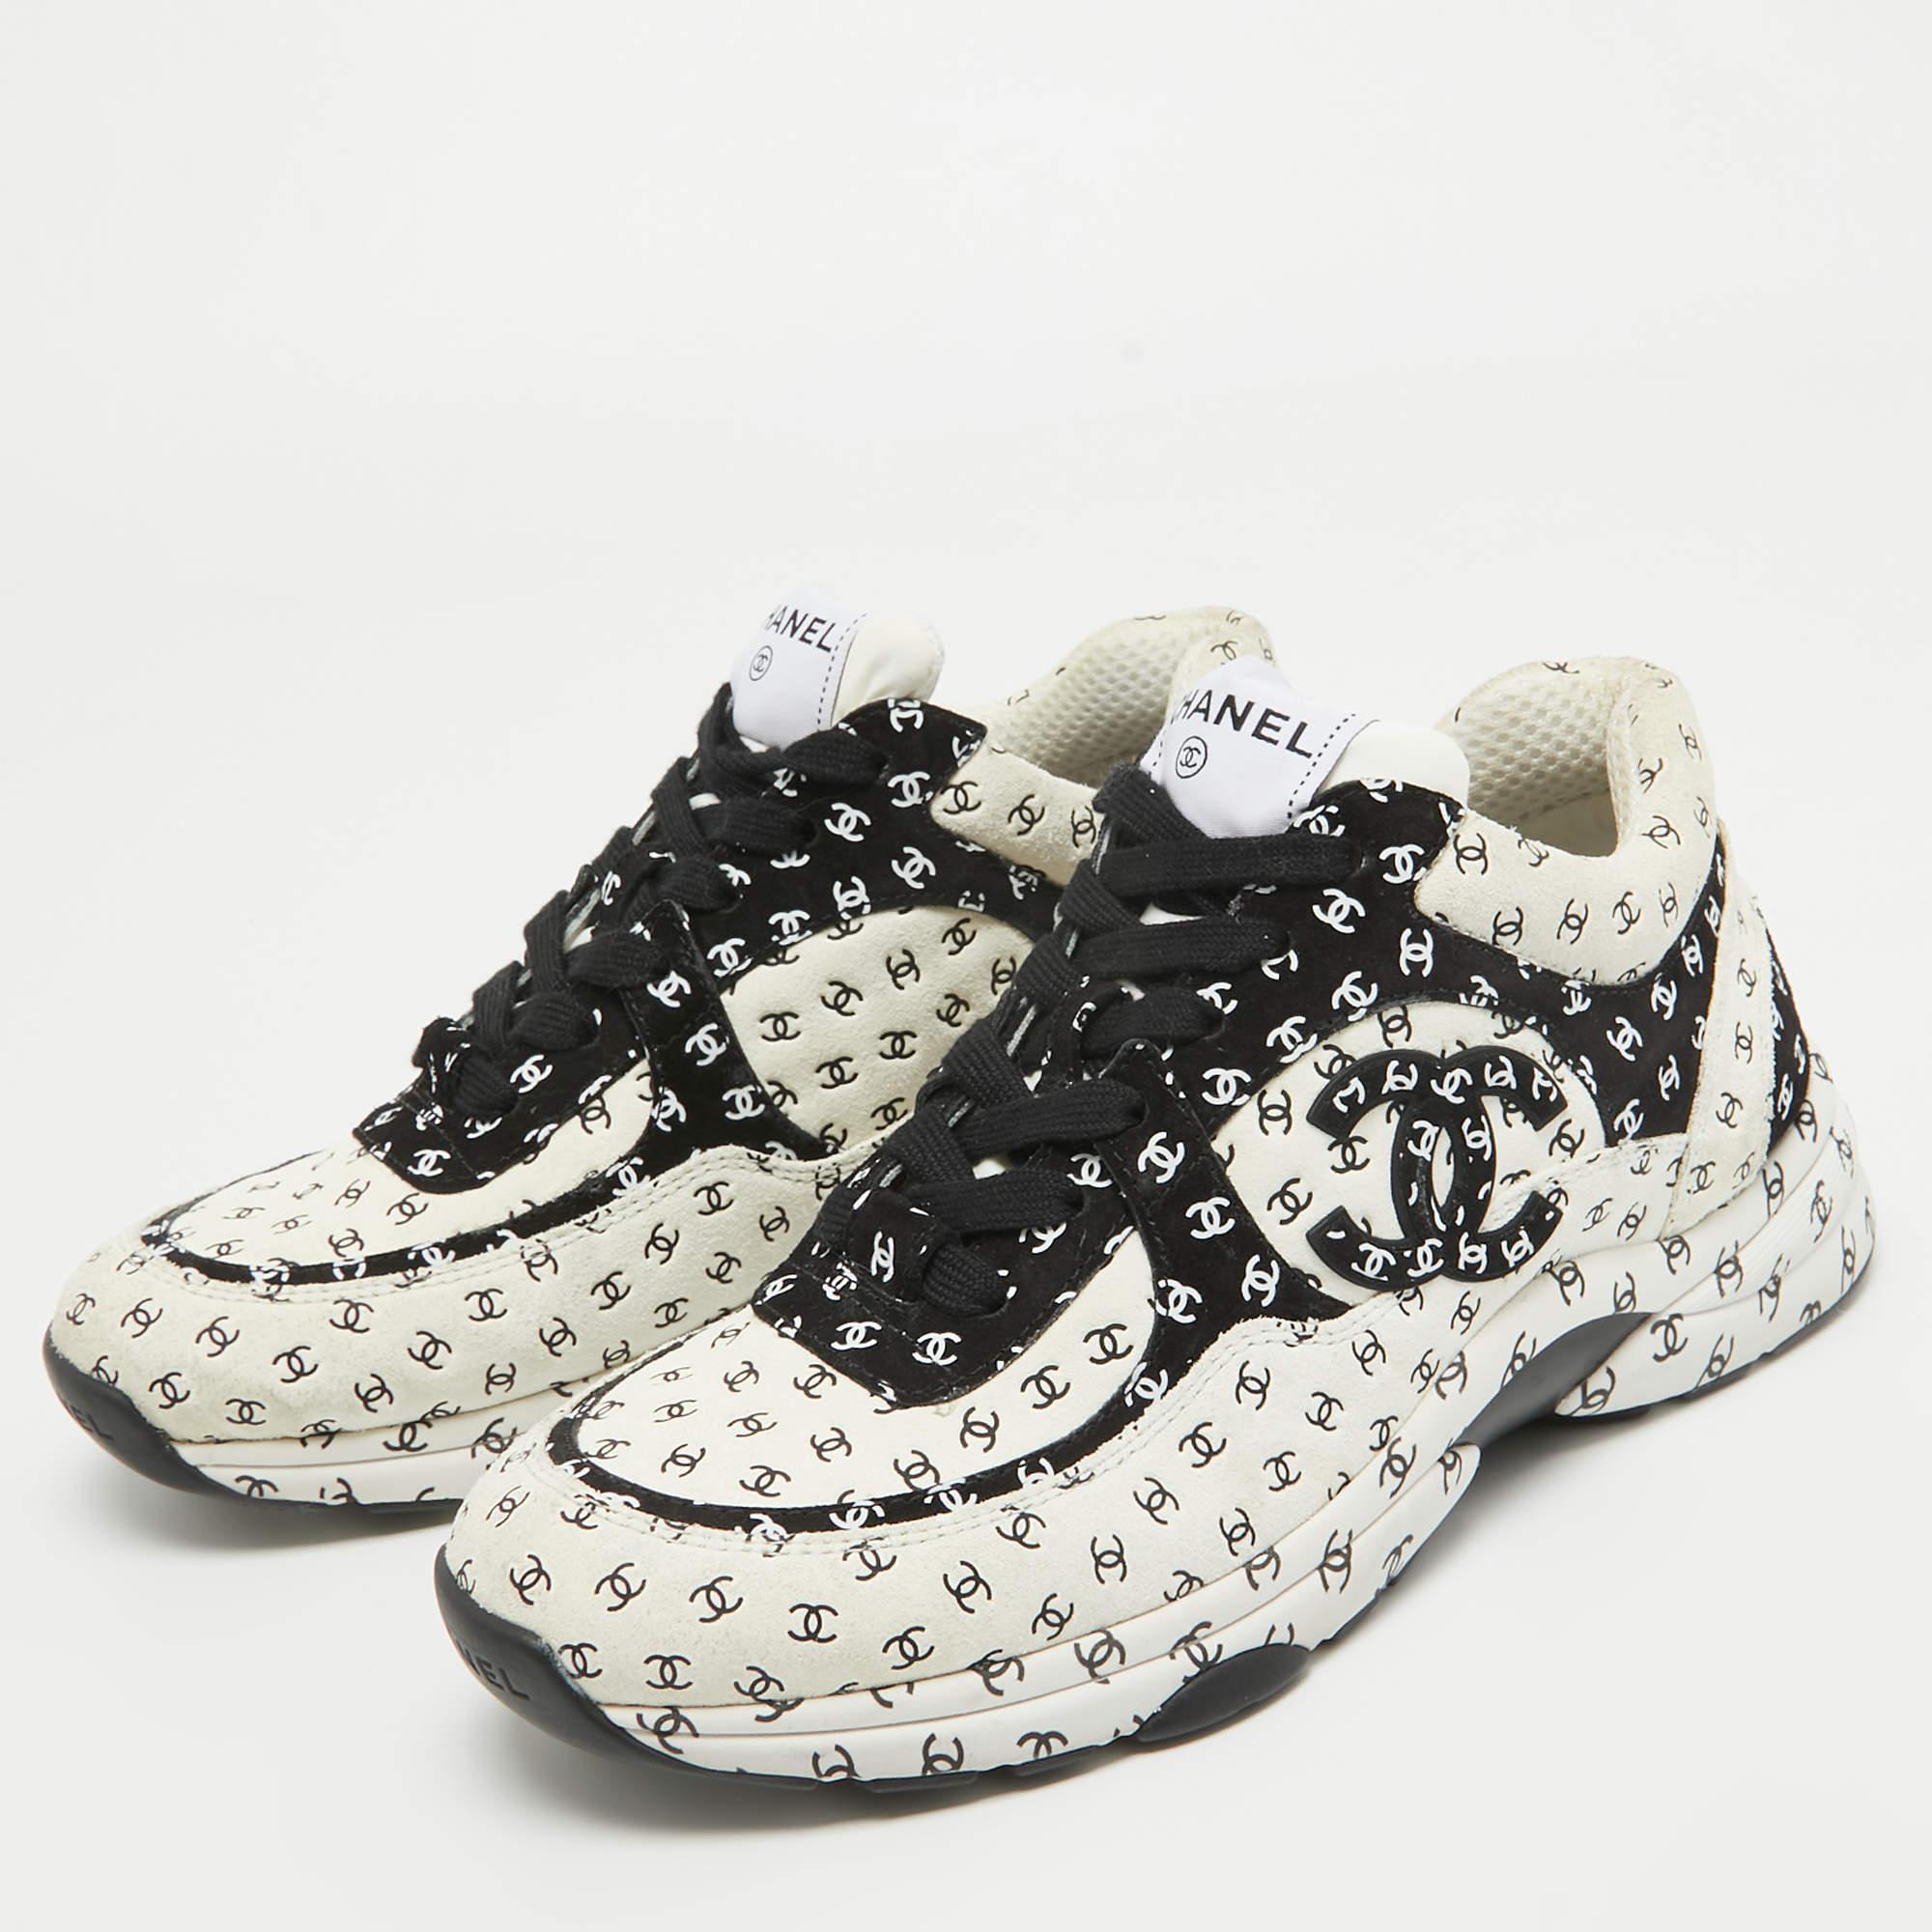 These unique sneakers from Chanel get full marks for style and comfort! The low-top sneakers have been crafted in CC-embossed suede. They come equipped with lace-ups, comfortable insoles, and tough soles.

